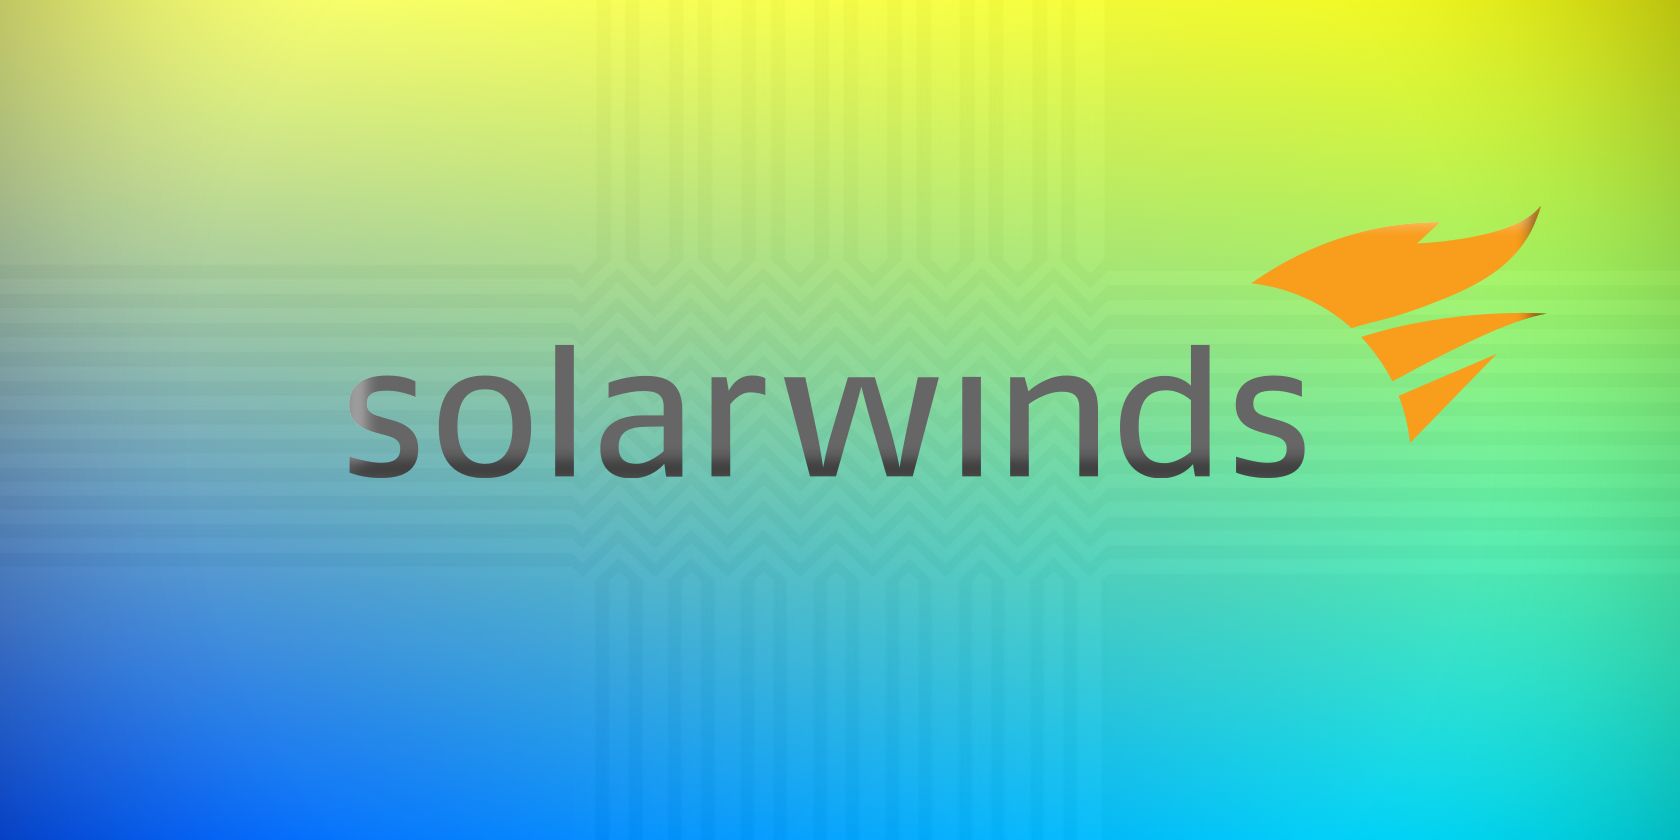 former-solarwinds-ceo-blames-intern-for-password-security-breach